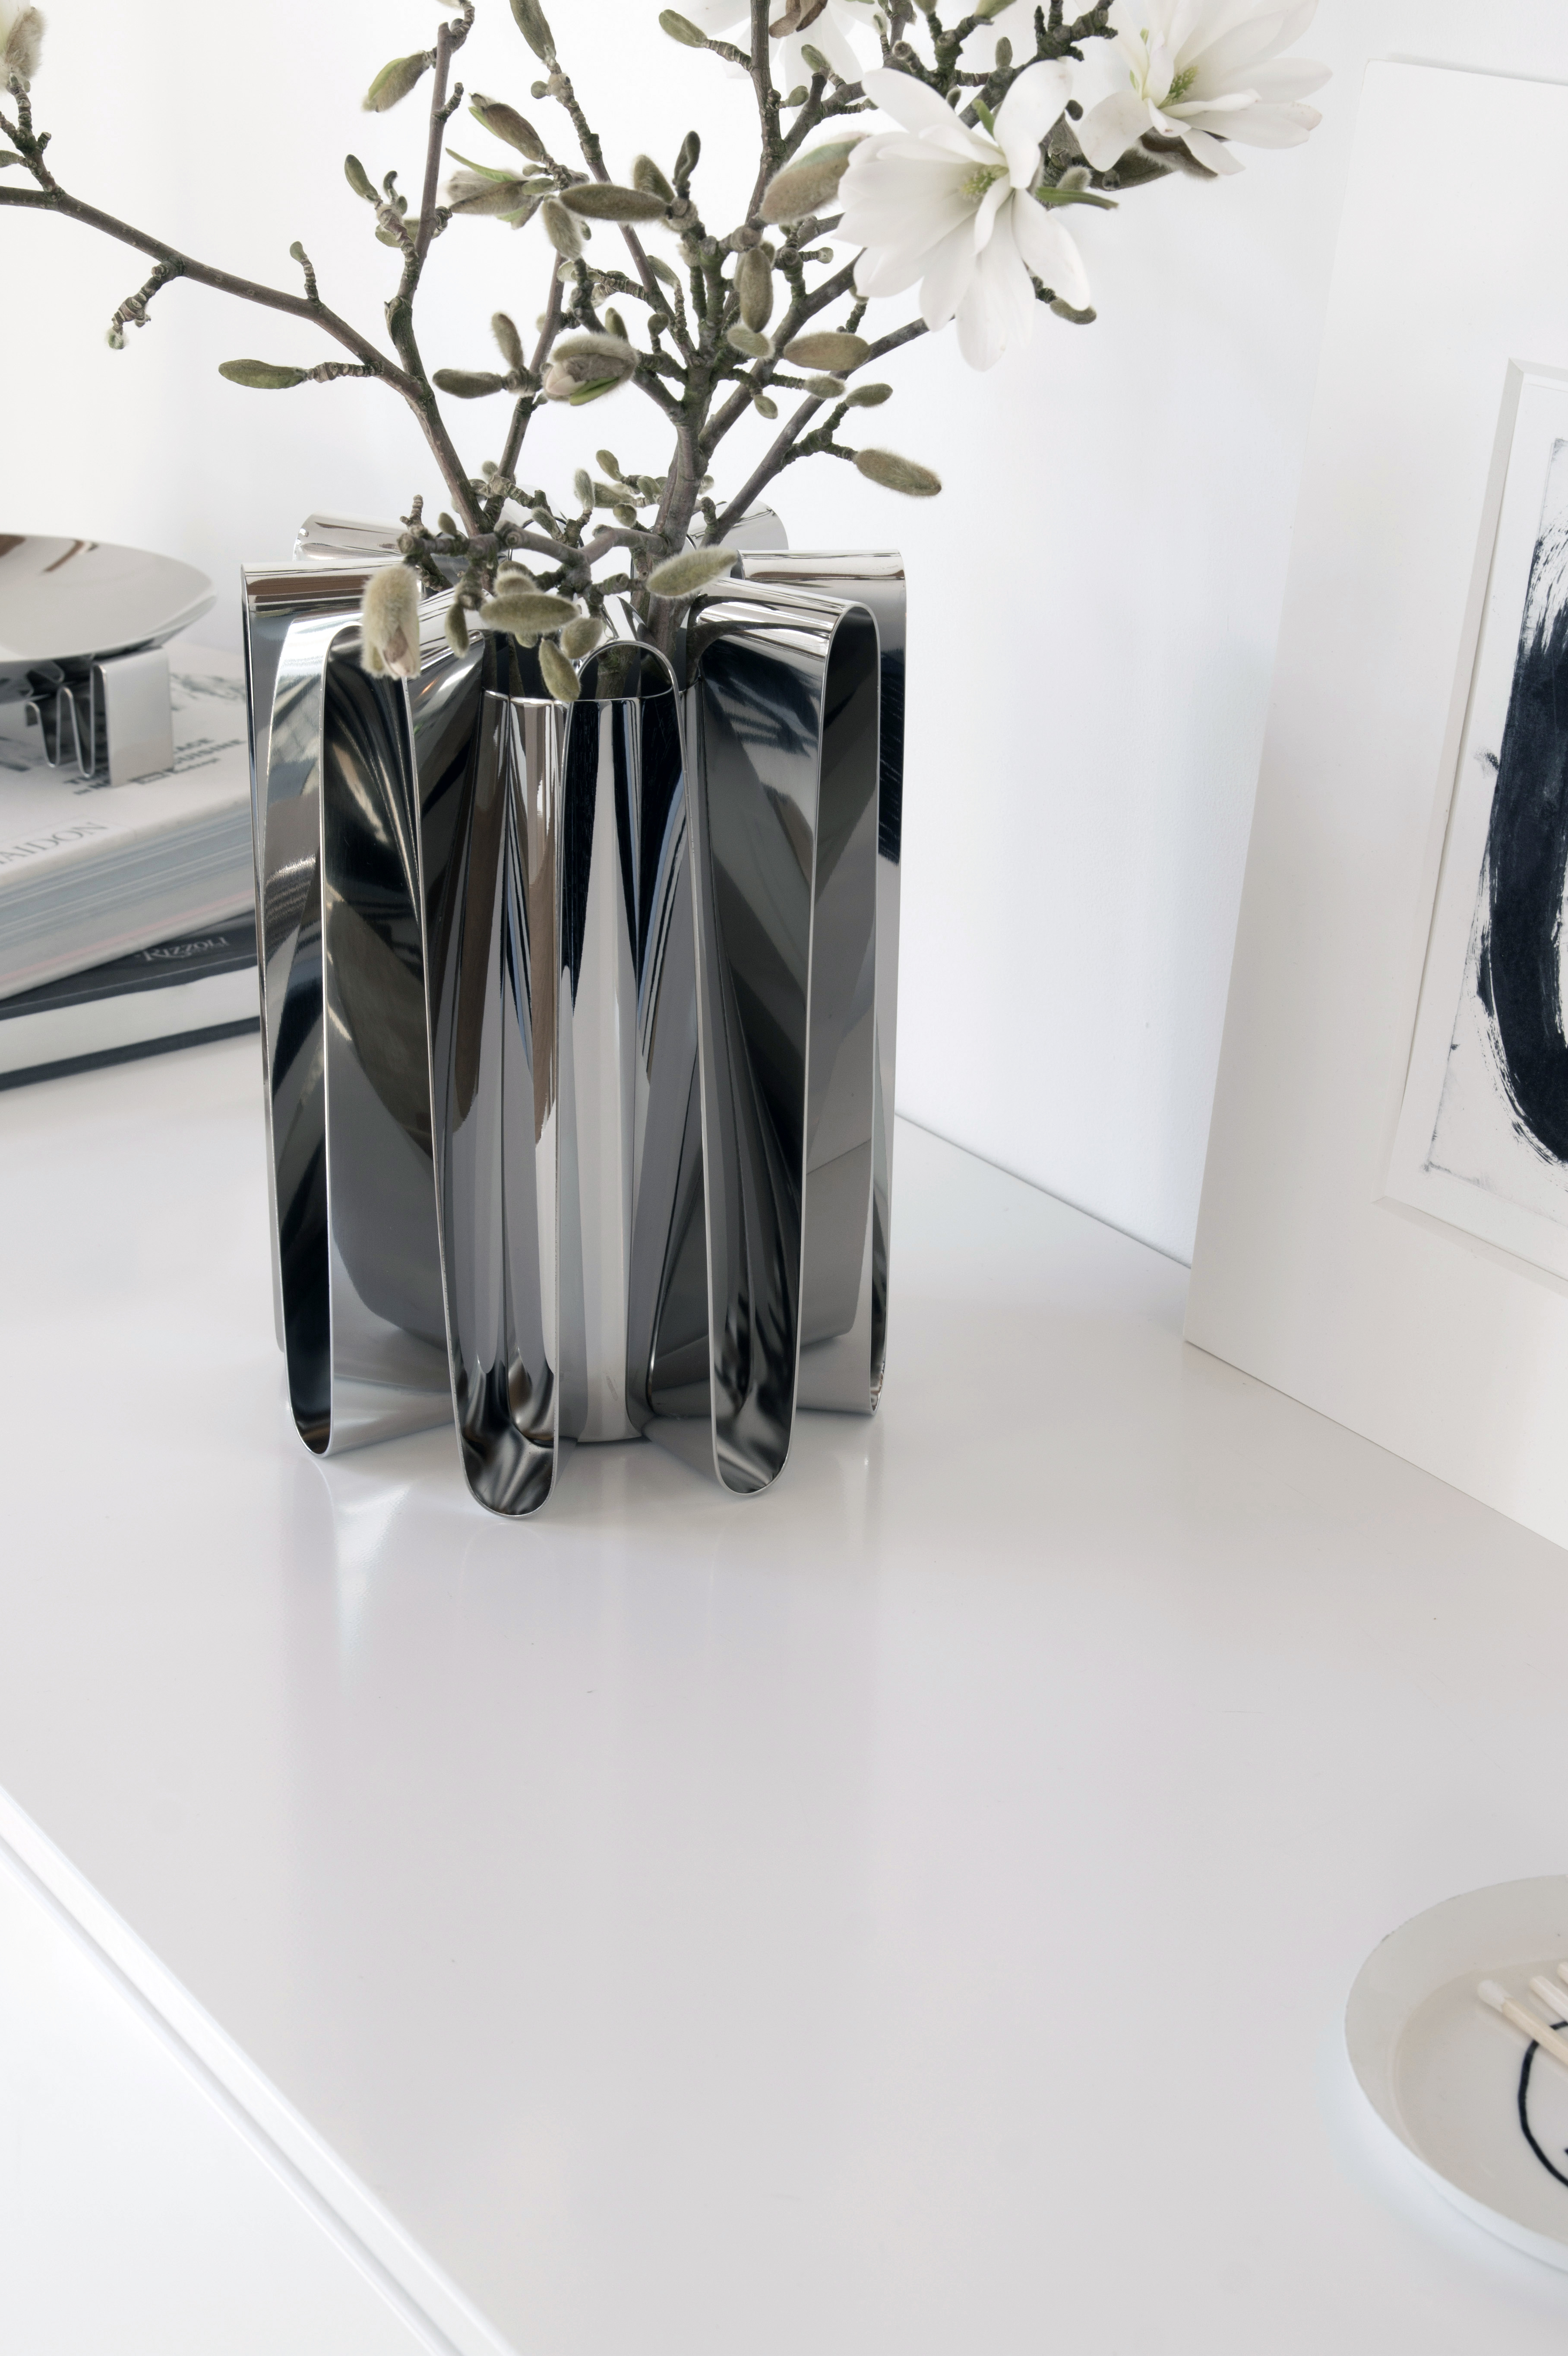 Frequency collection by Kelly Wearstler for Georg Jensen